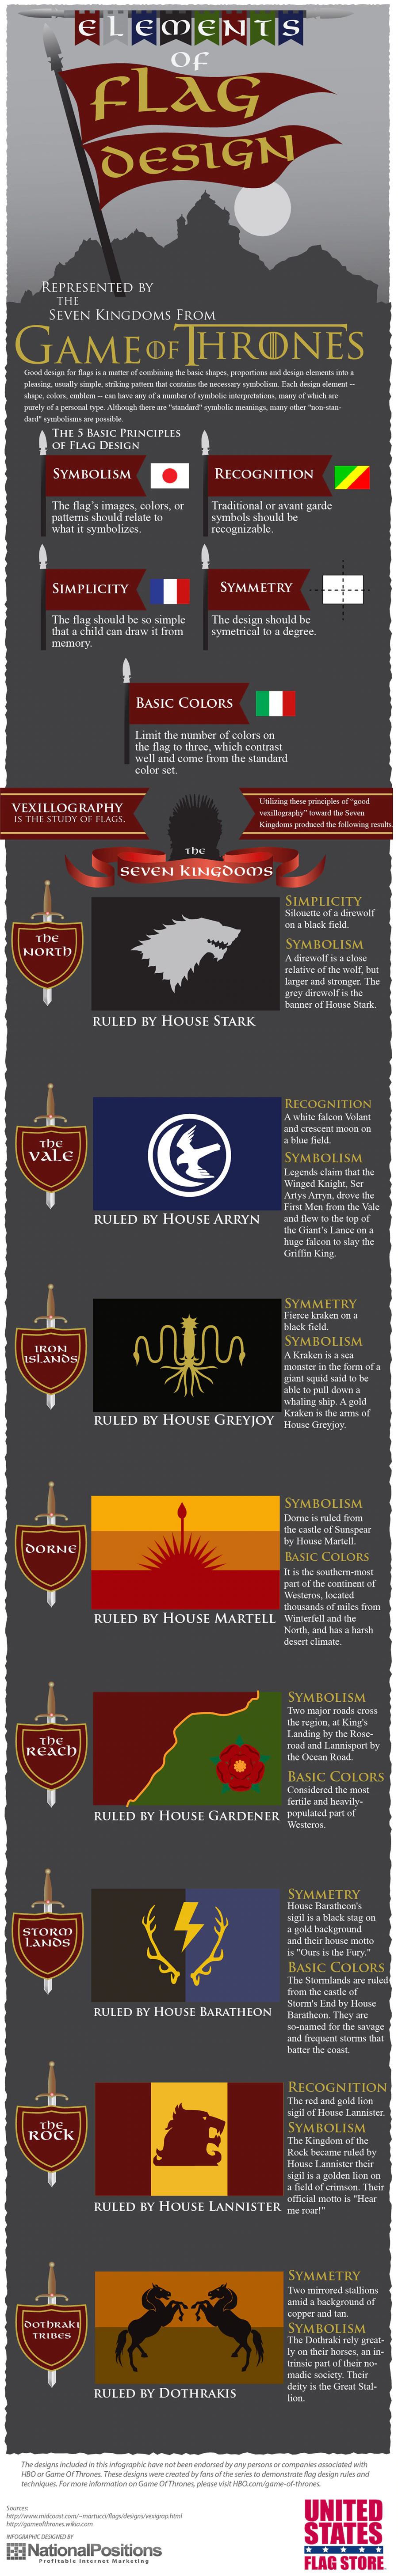 Flag Design Infographic inspired by Game of Thrones